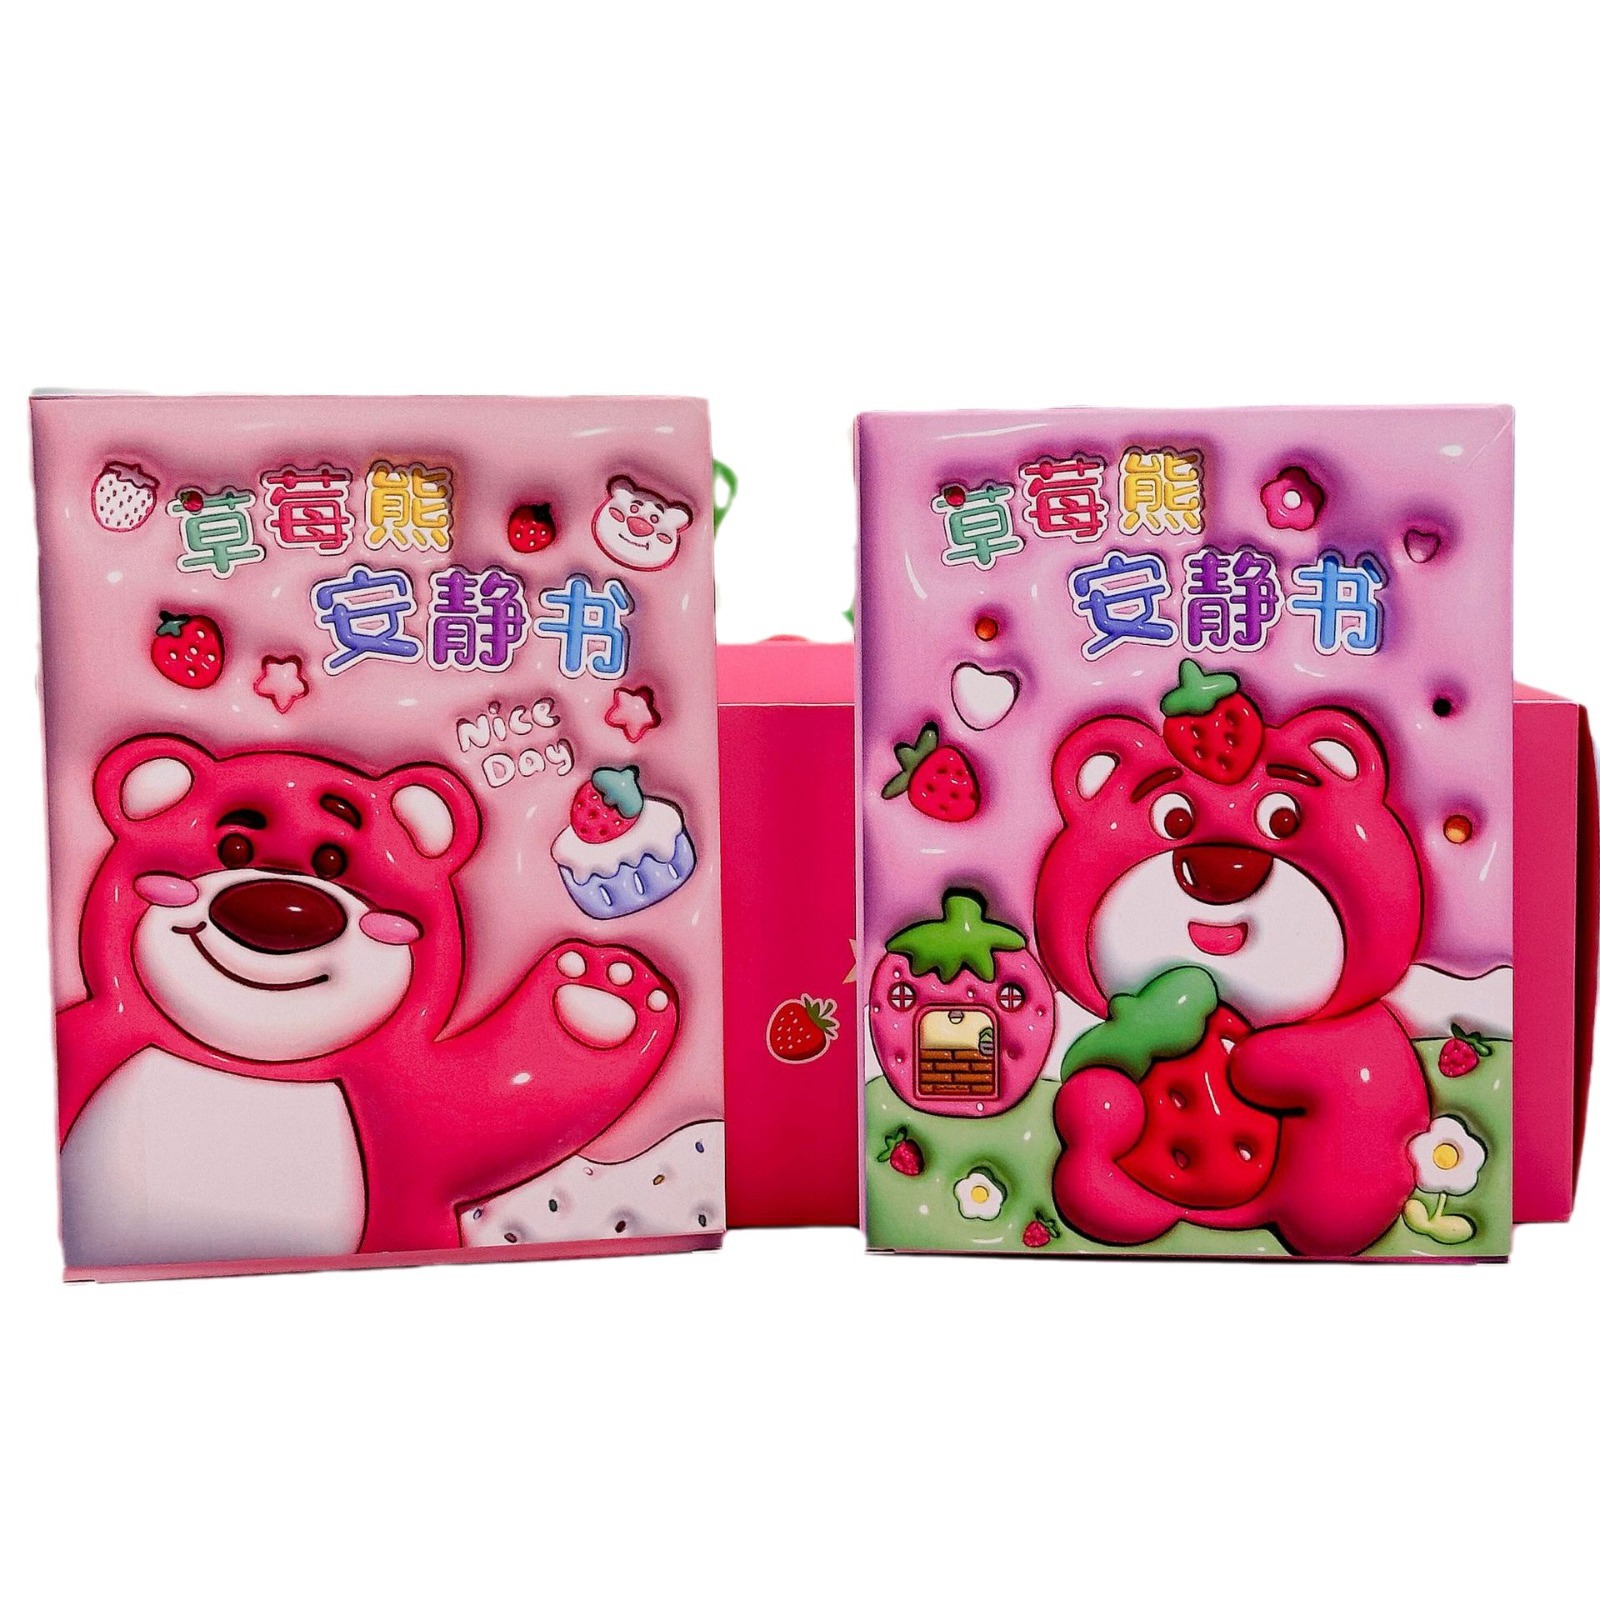 24 into Strawberry Bear Quiet Book Visual Expansion Quiet Book Diy Handmade Puzzle Tailored Decompression Children's Toys